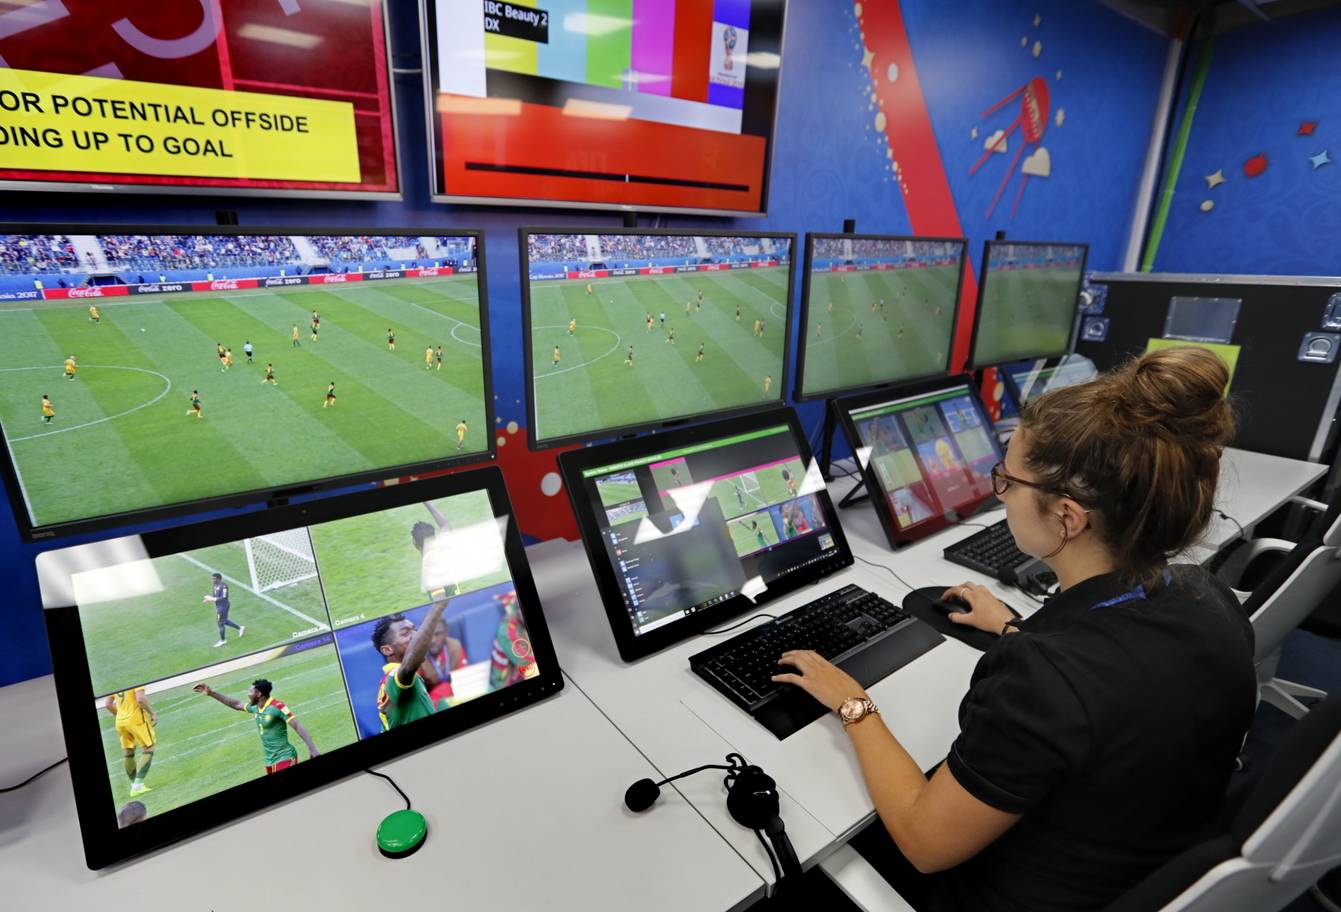 A view of the video assistant refereeing VAR operation room of the 2018 World Cup International Broadcast Centre IBC in Moscow Russia